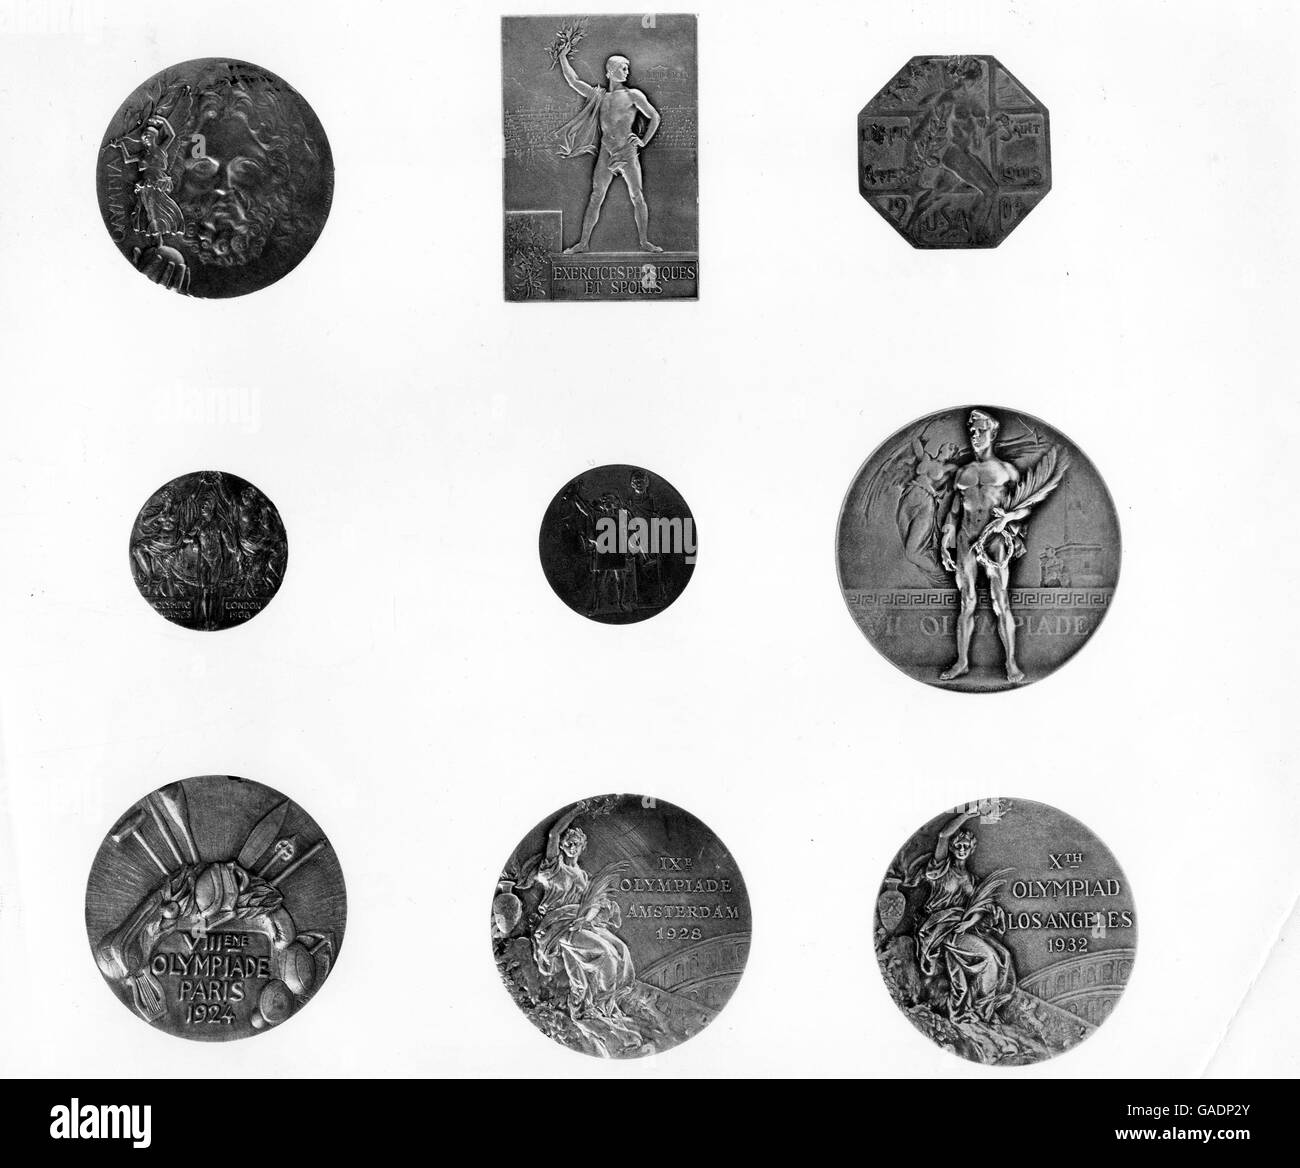 Official Olympic Medals 1896-1932: (l-r top): Greece Athens, 1896; France, Paris 1900; USA, St Louis, 1904; (l-r middle) Great Britain, London, 1908; Sweden, Stockholm, 1912; Belgium, Anvers, 1920; (l-r bottom) France, Paris, 1924; Netherlands, Amsterdam, 1928; USA, Los Angeles, 1932. Stock Photo